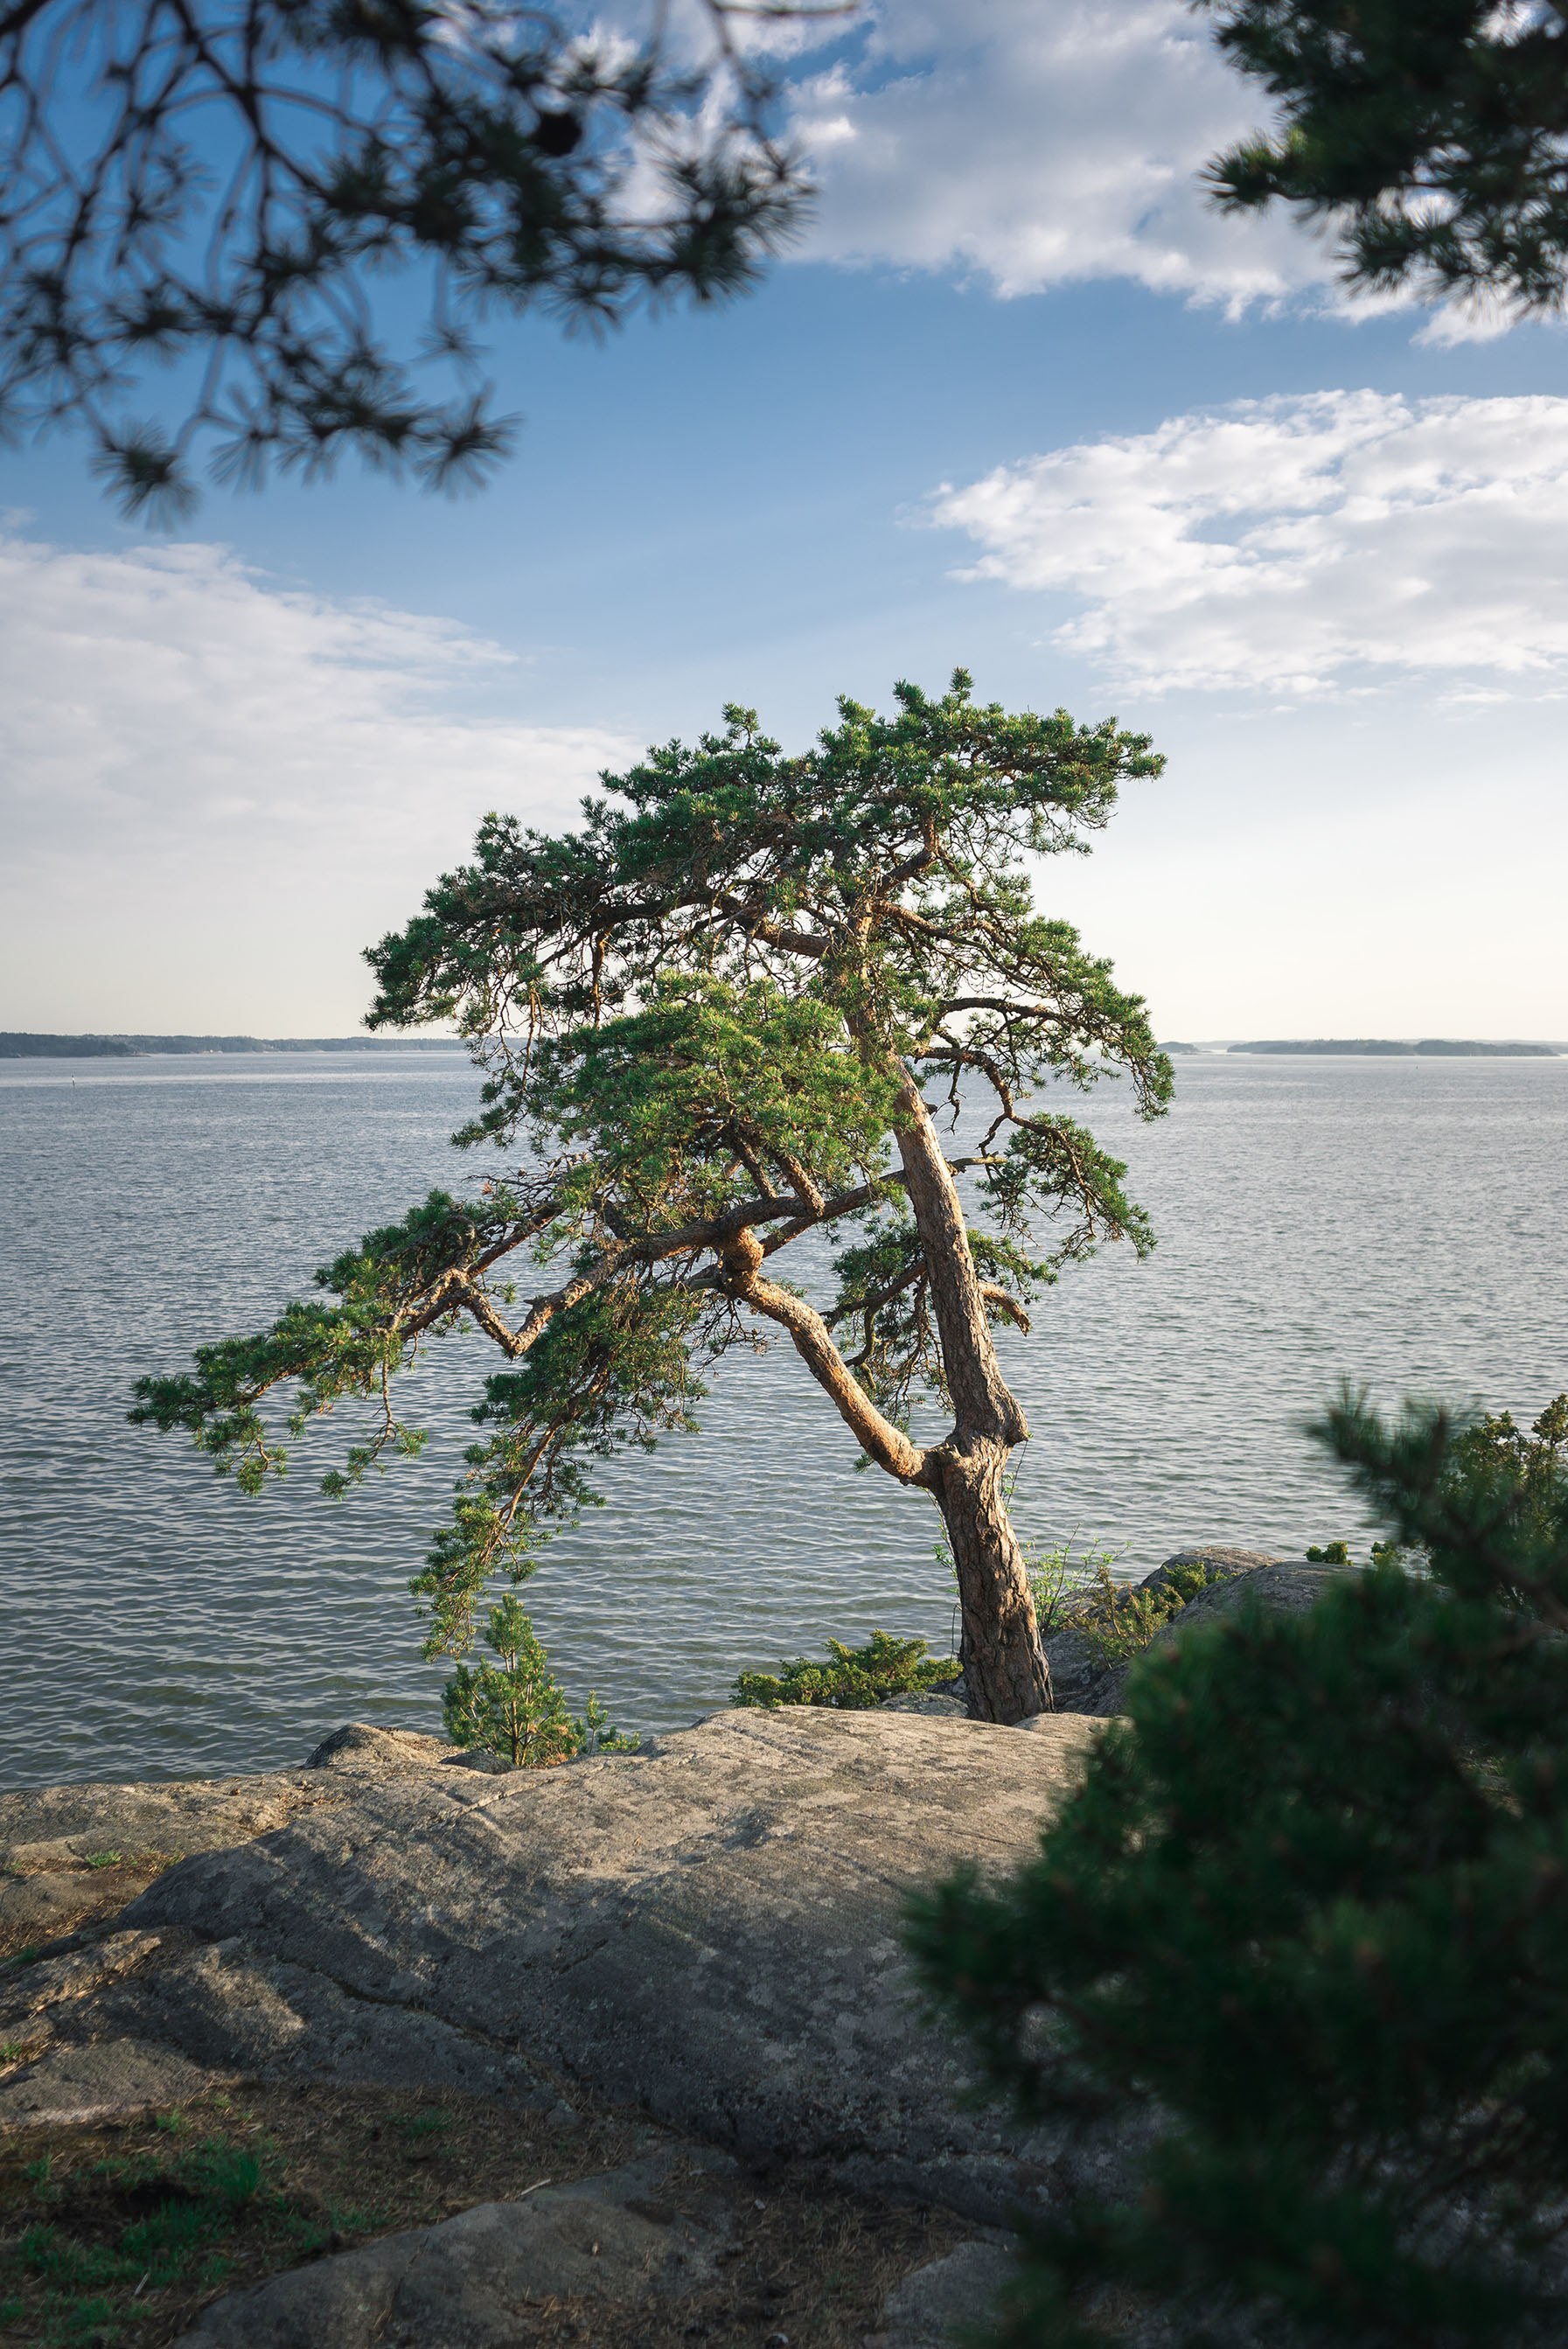 Southwest Finland in the eyes of Circular Economy